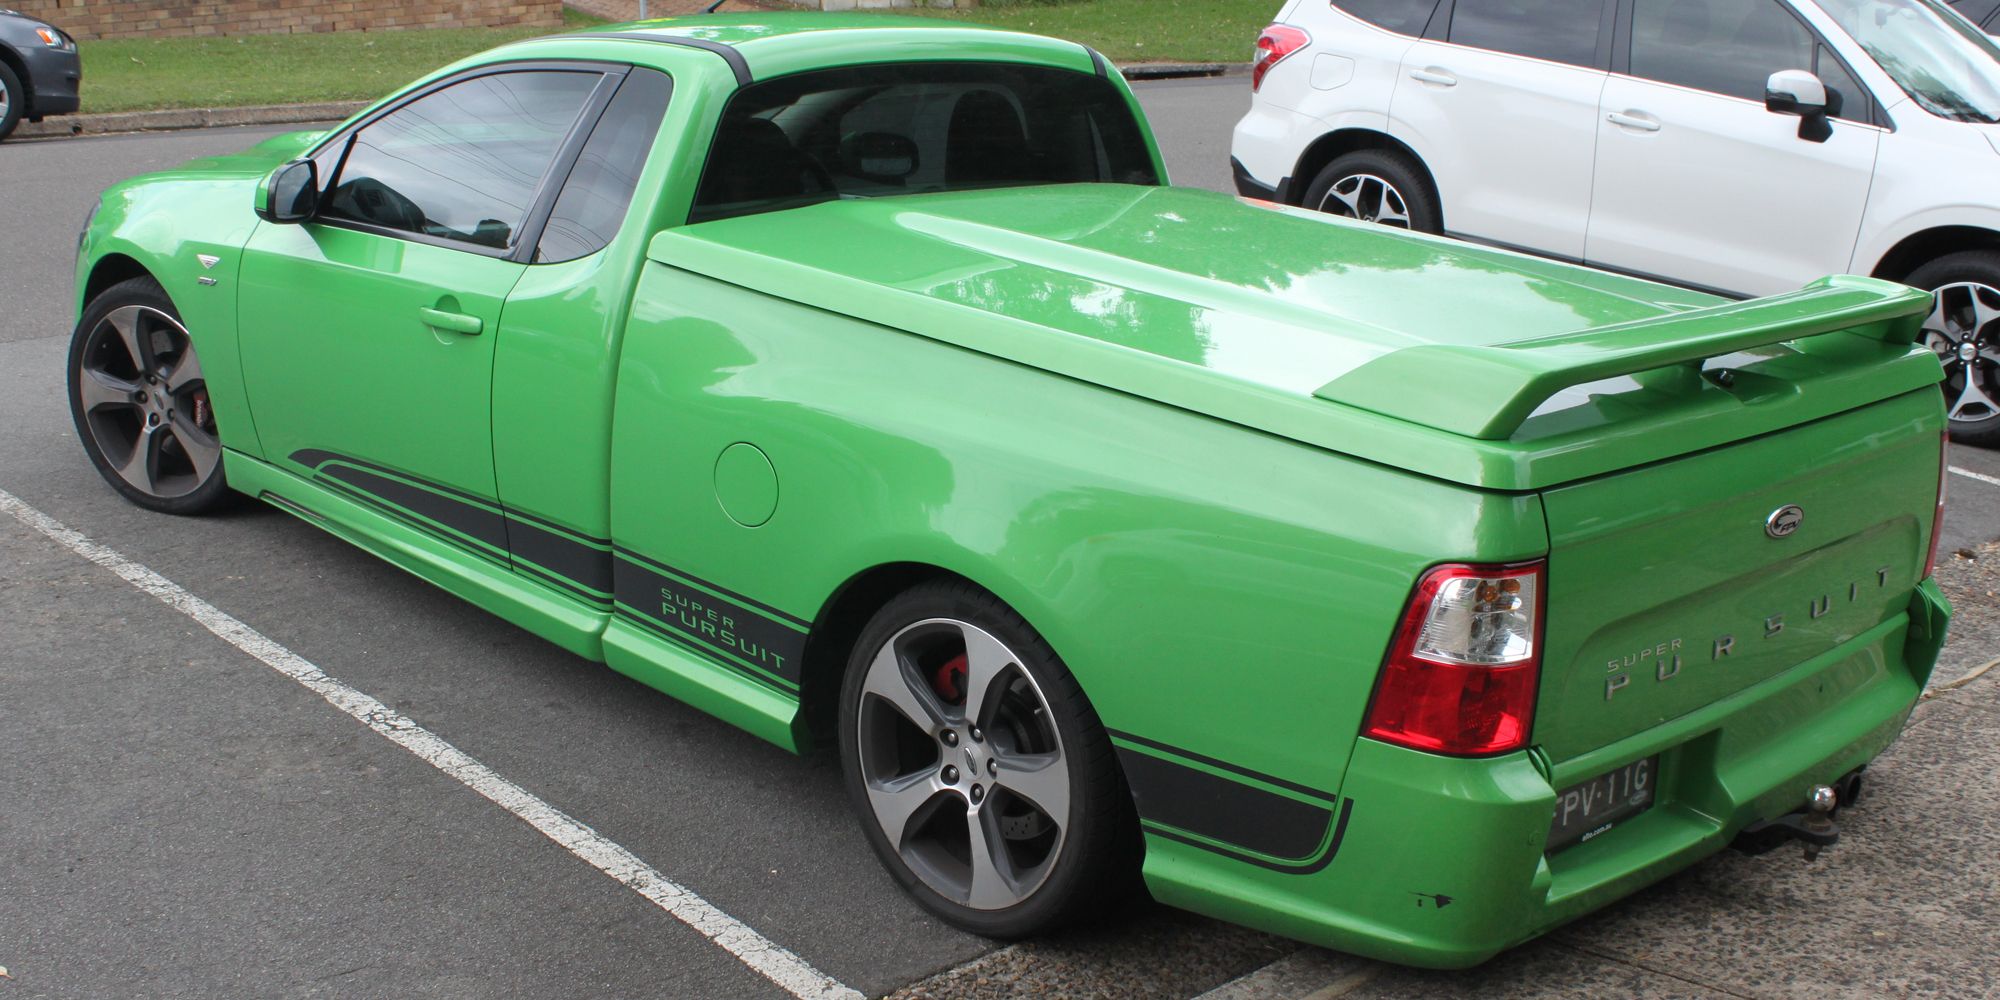 The rear of the Pursuit Ute